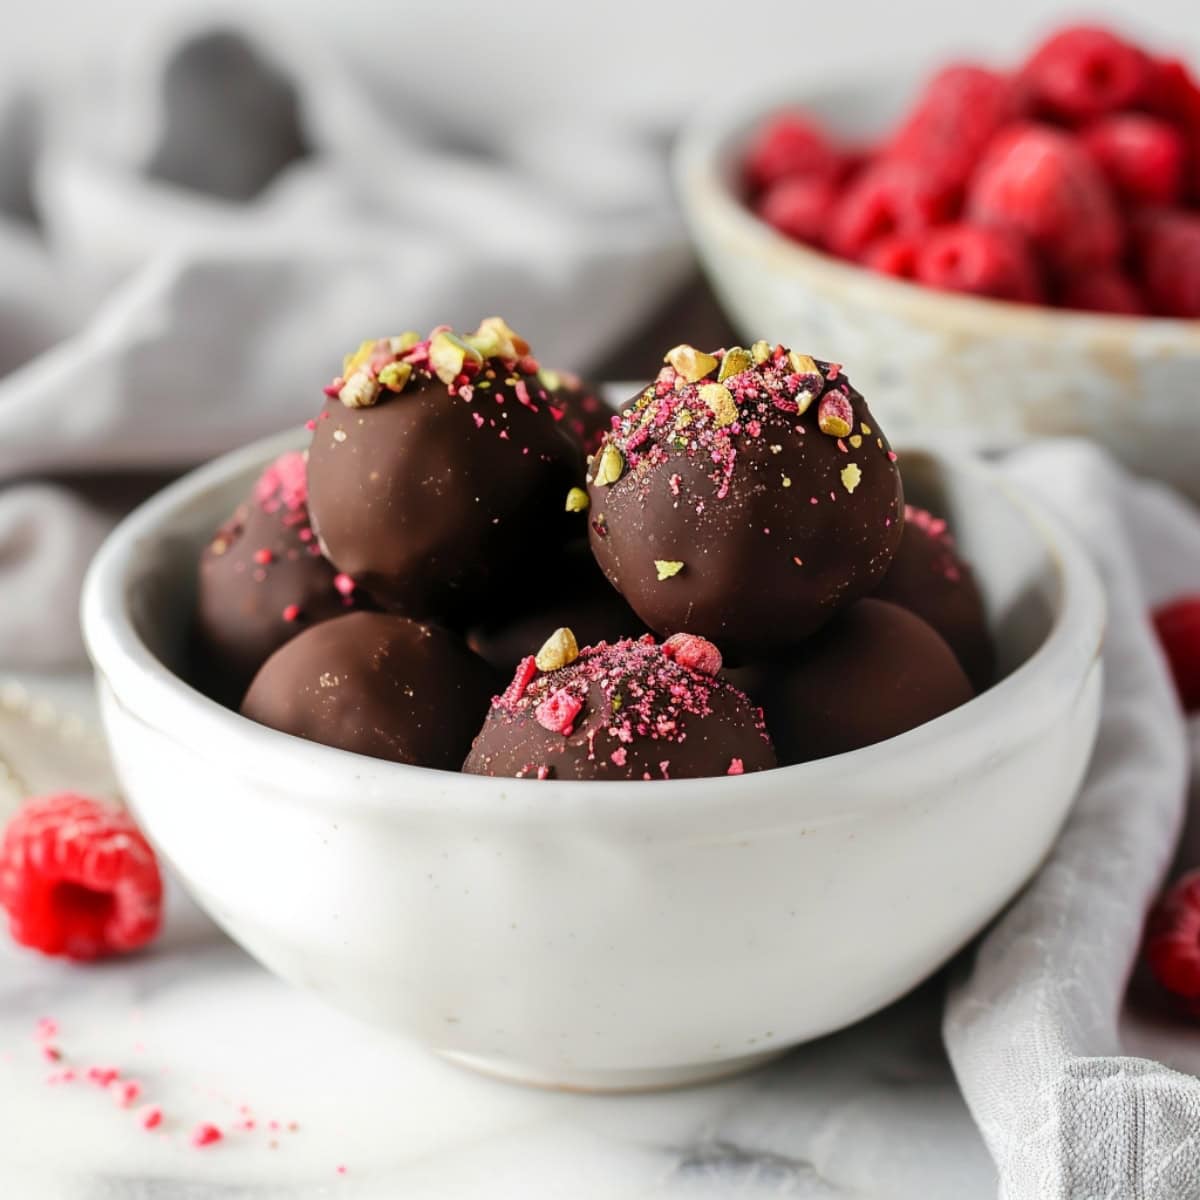 A set of beautifully arranged raspberry truffles in a white bowl topped with crushed pistachio nuts and freeze-dried raspberries